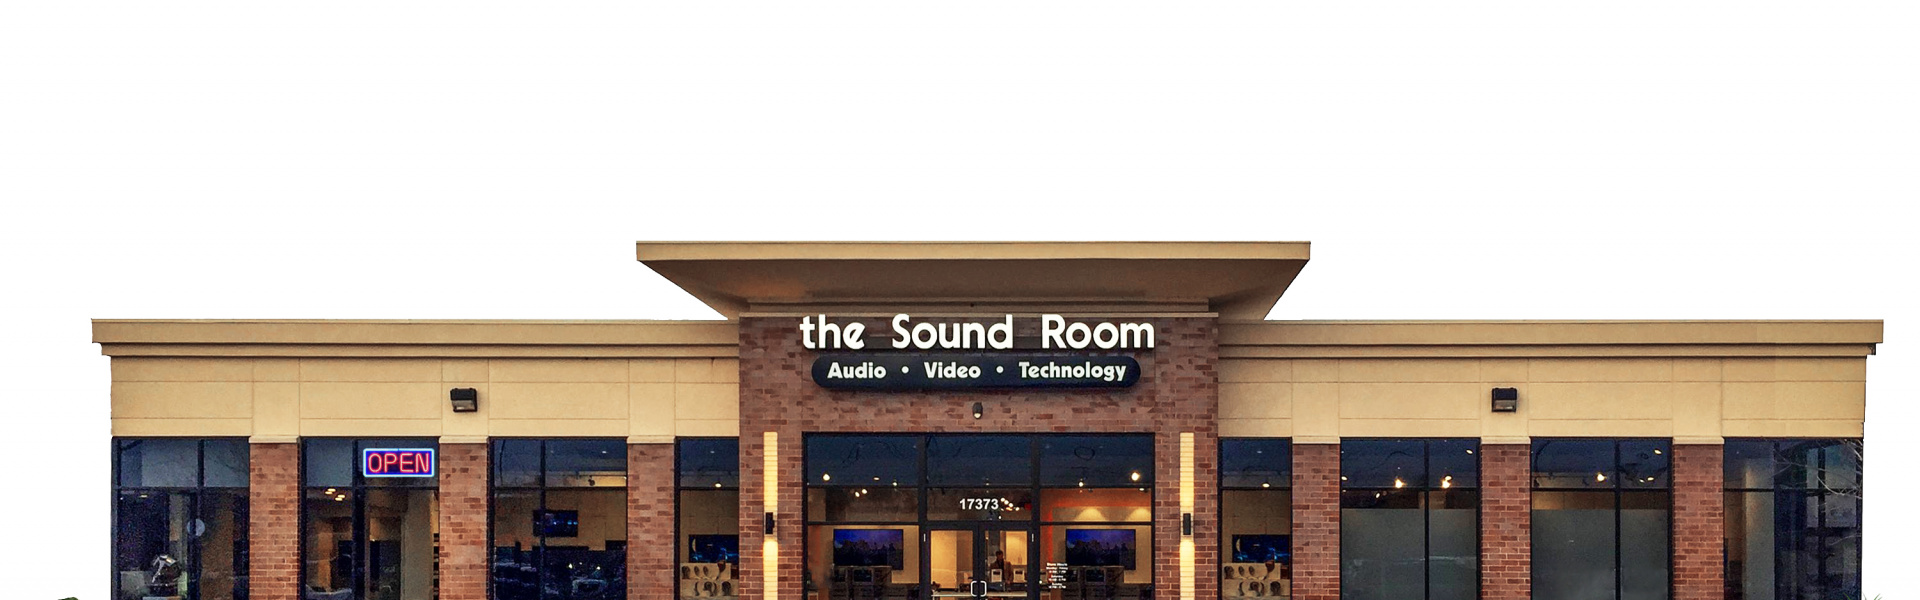 Smart home installation by The Sound Room for Chesterfield